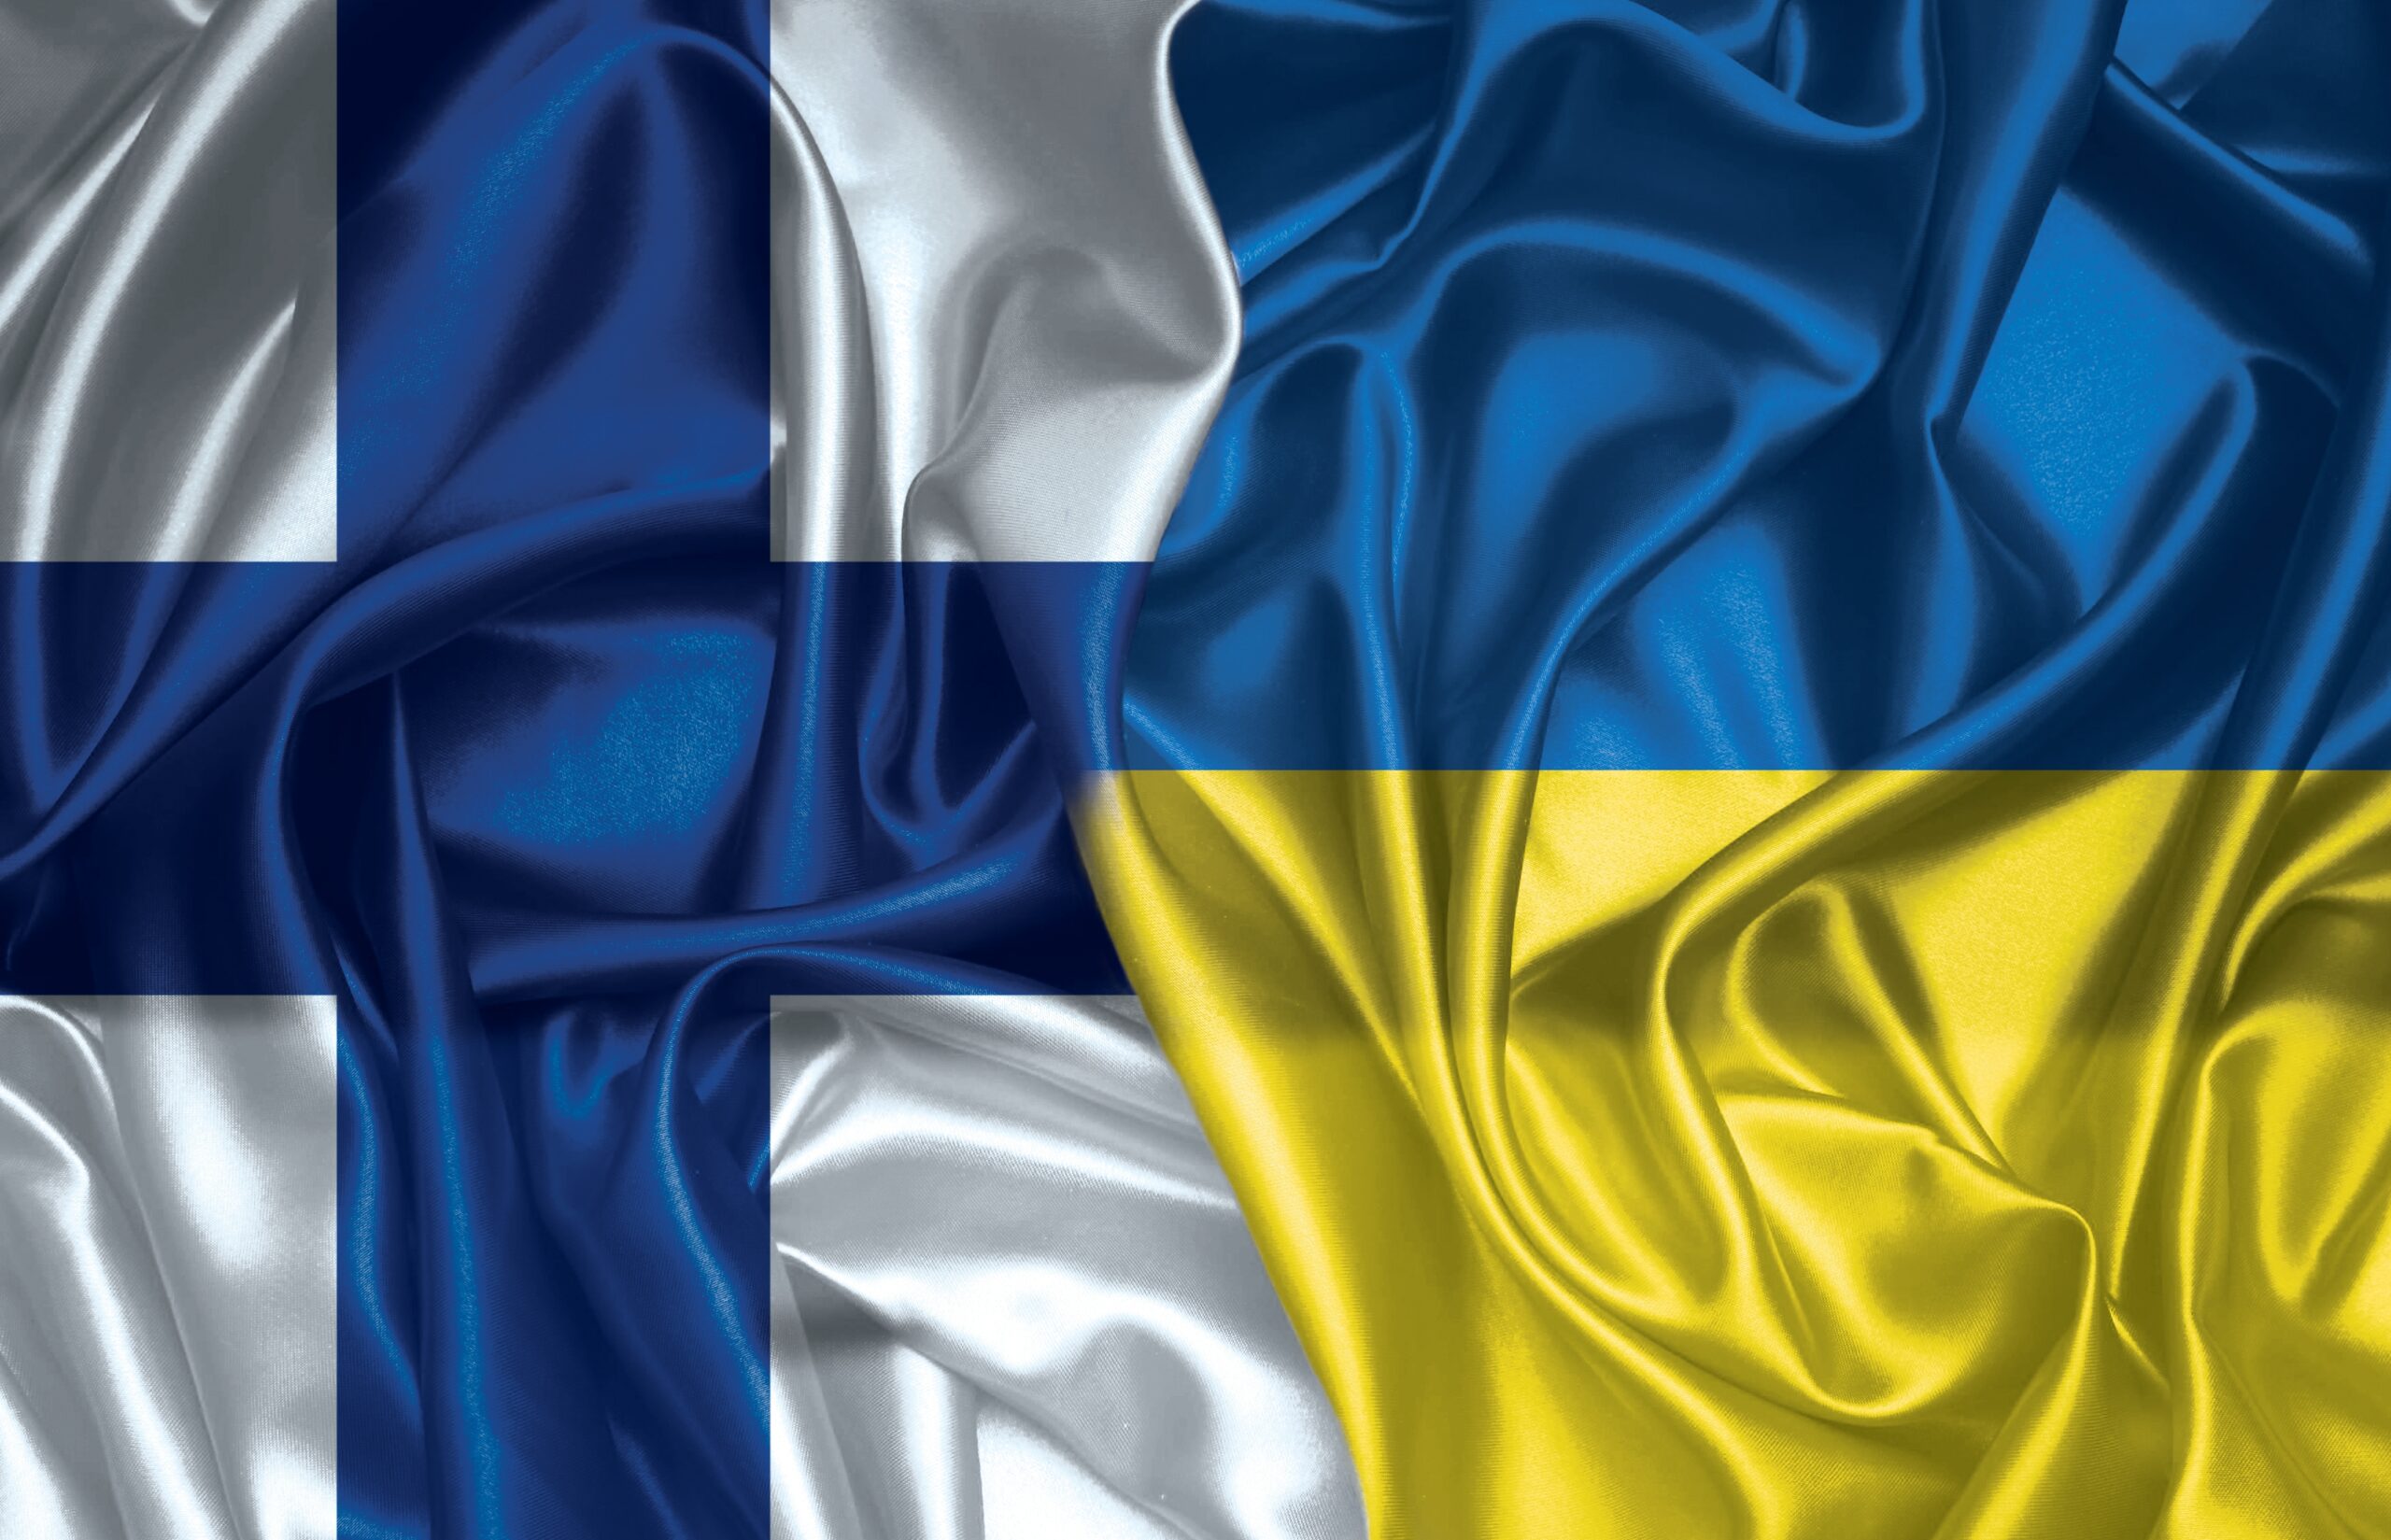 Finland to conduct interviews to find out how to better to support Ukrainian refugees